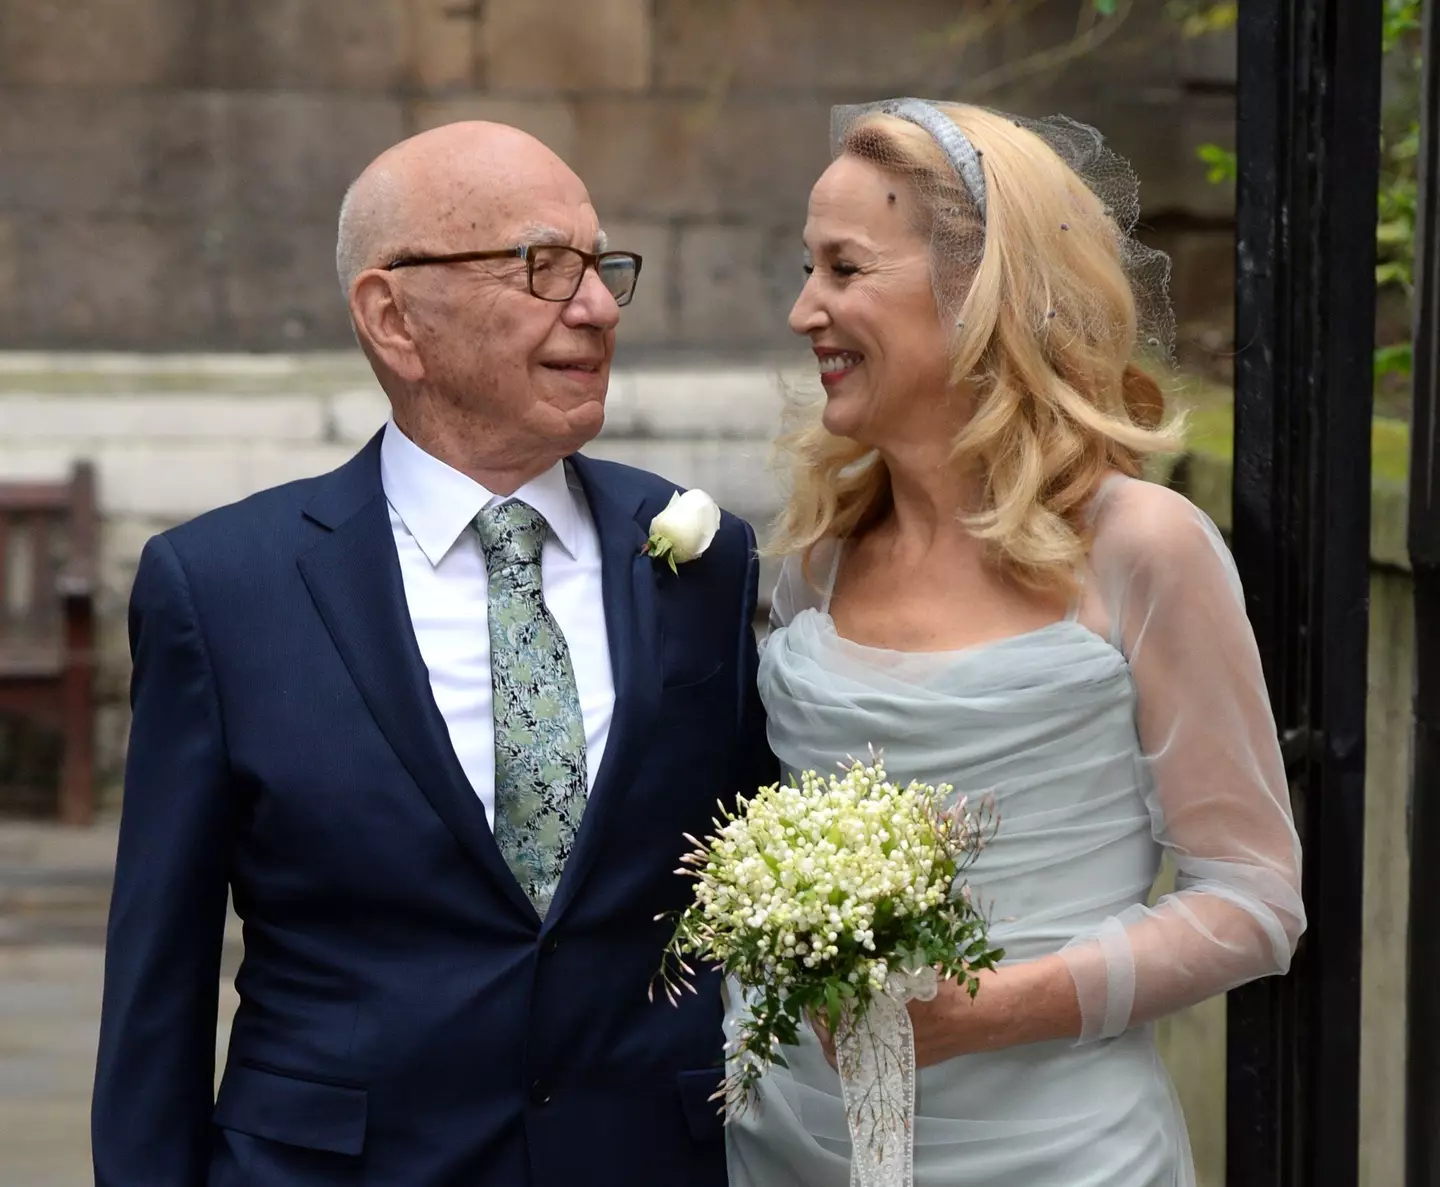 Murdoch and Hall have been married for six years but are reportedly divorcing.